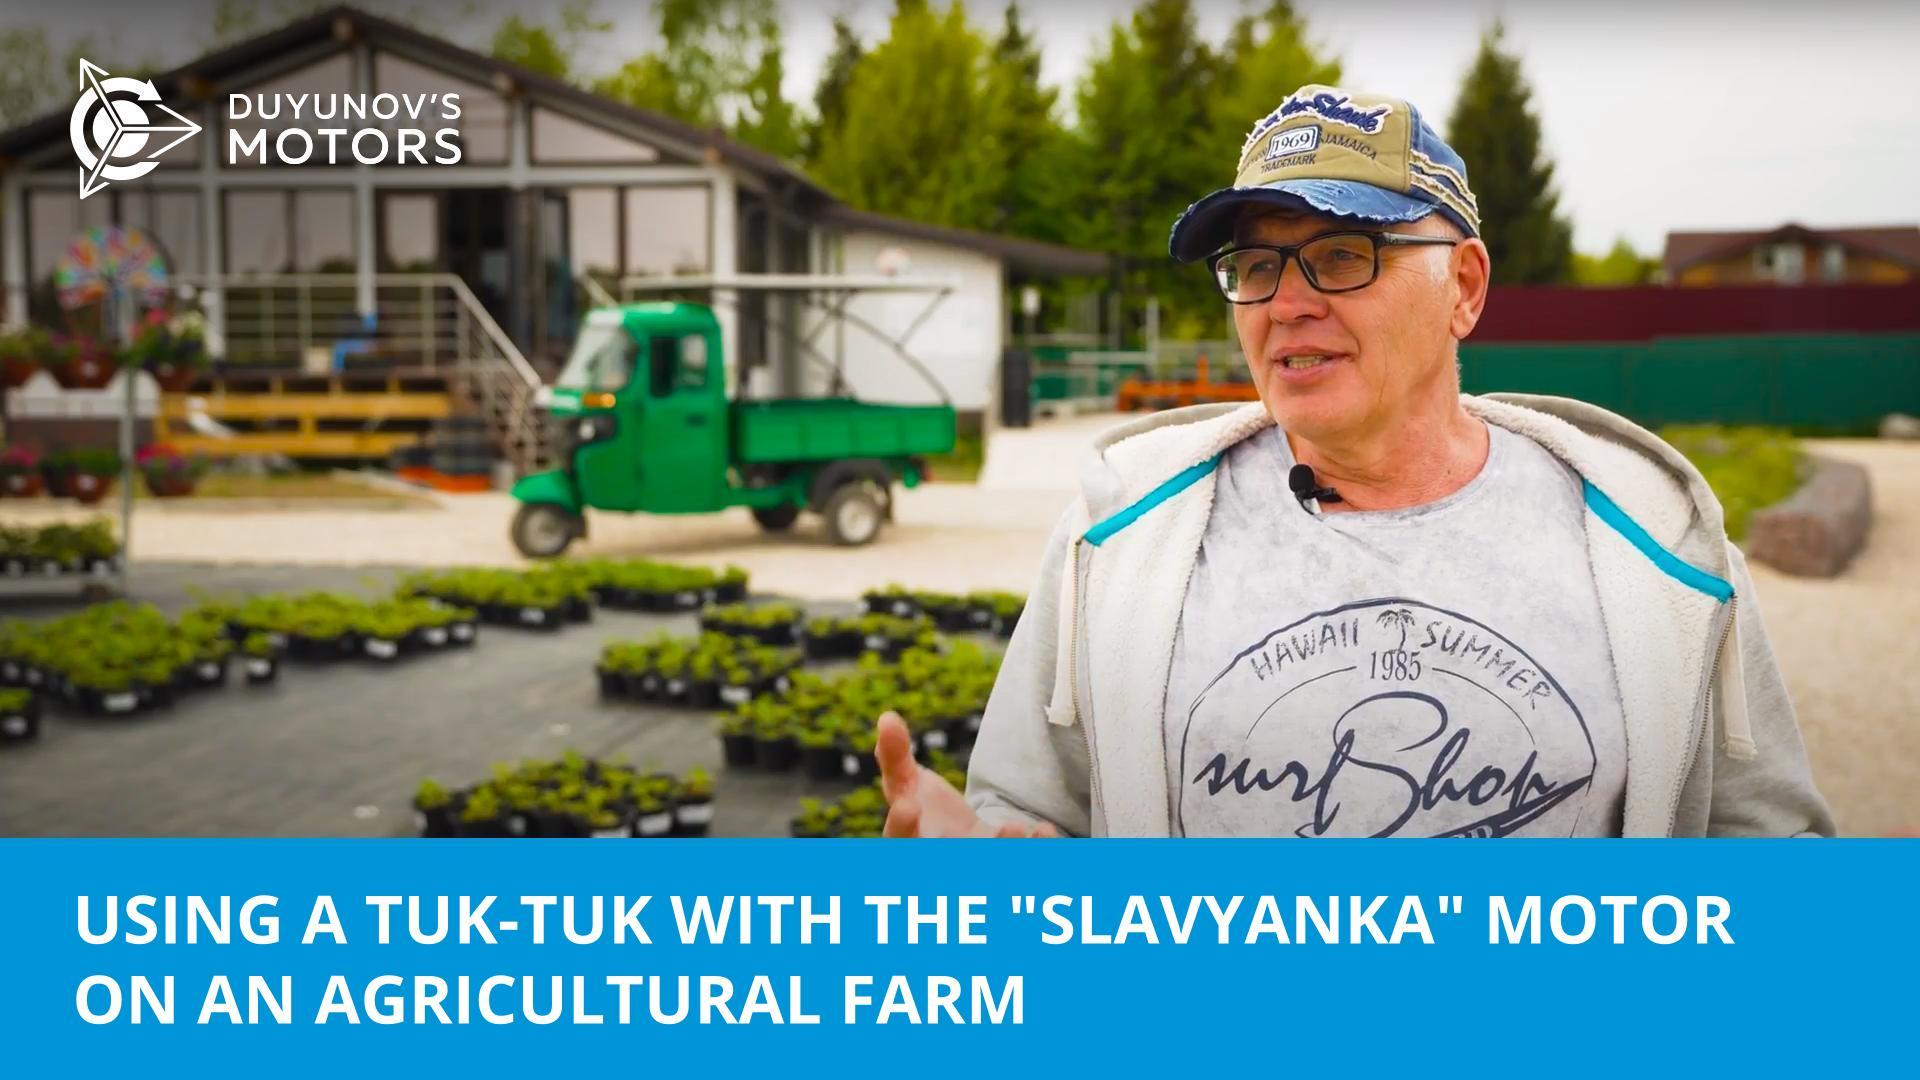 Green business assistant: using a tuk-tuk with the "Slavyanka" motor on an agricultural farm